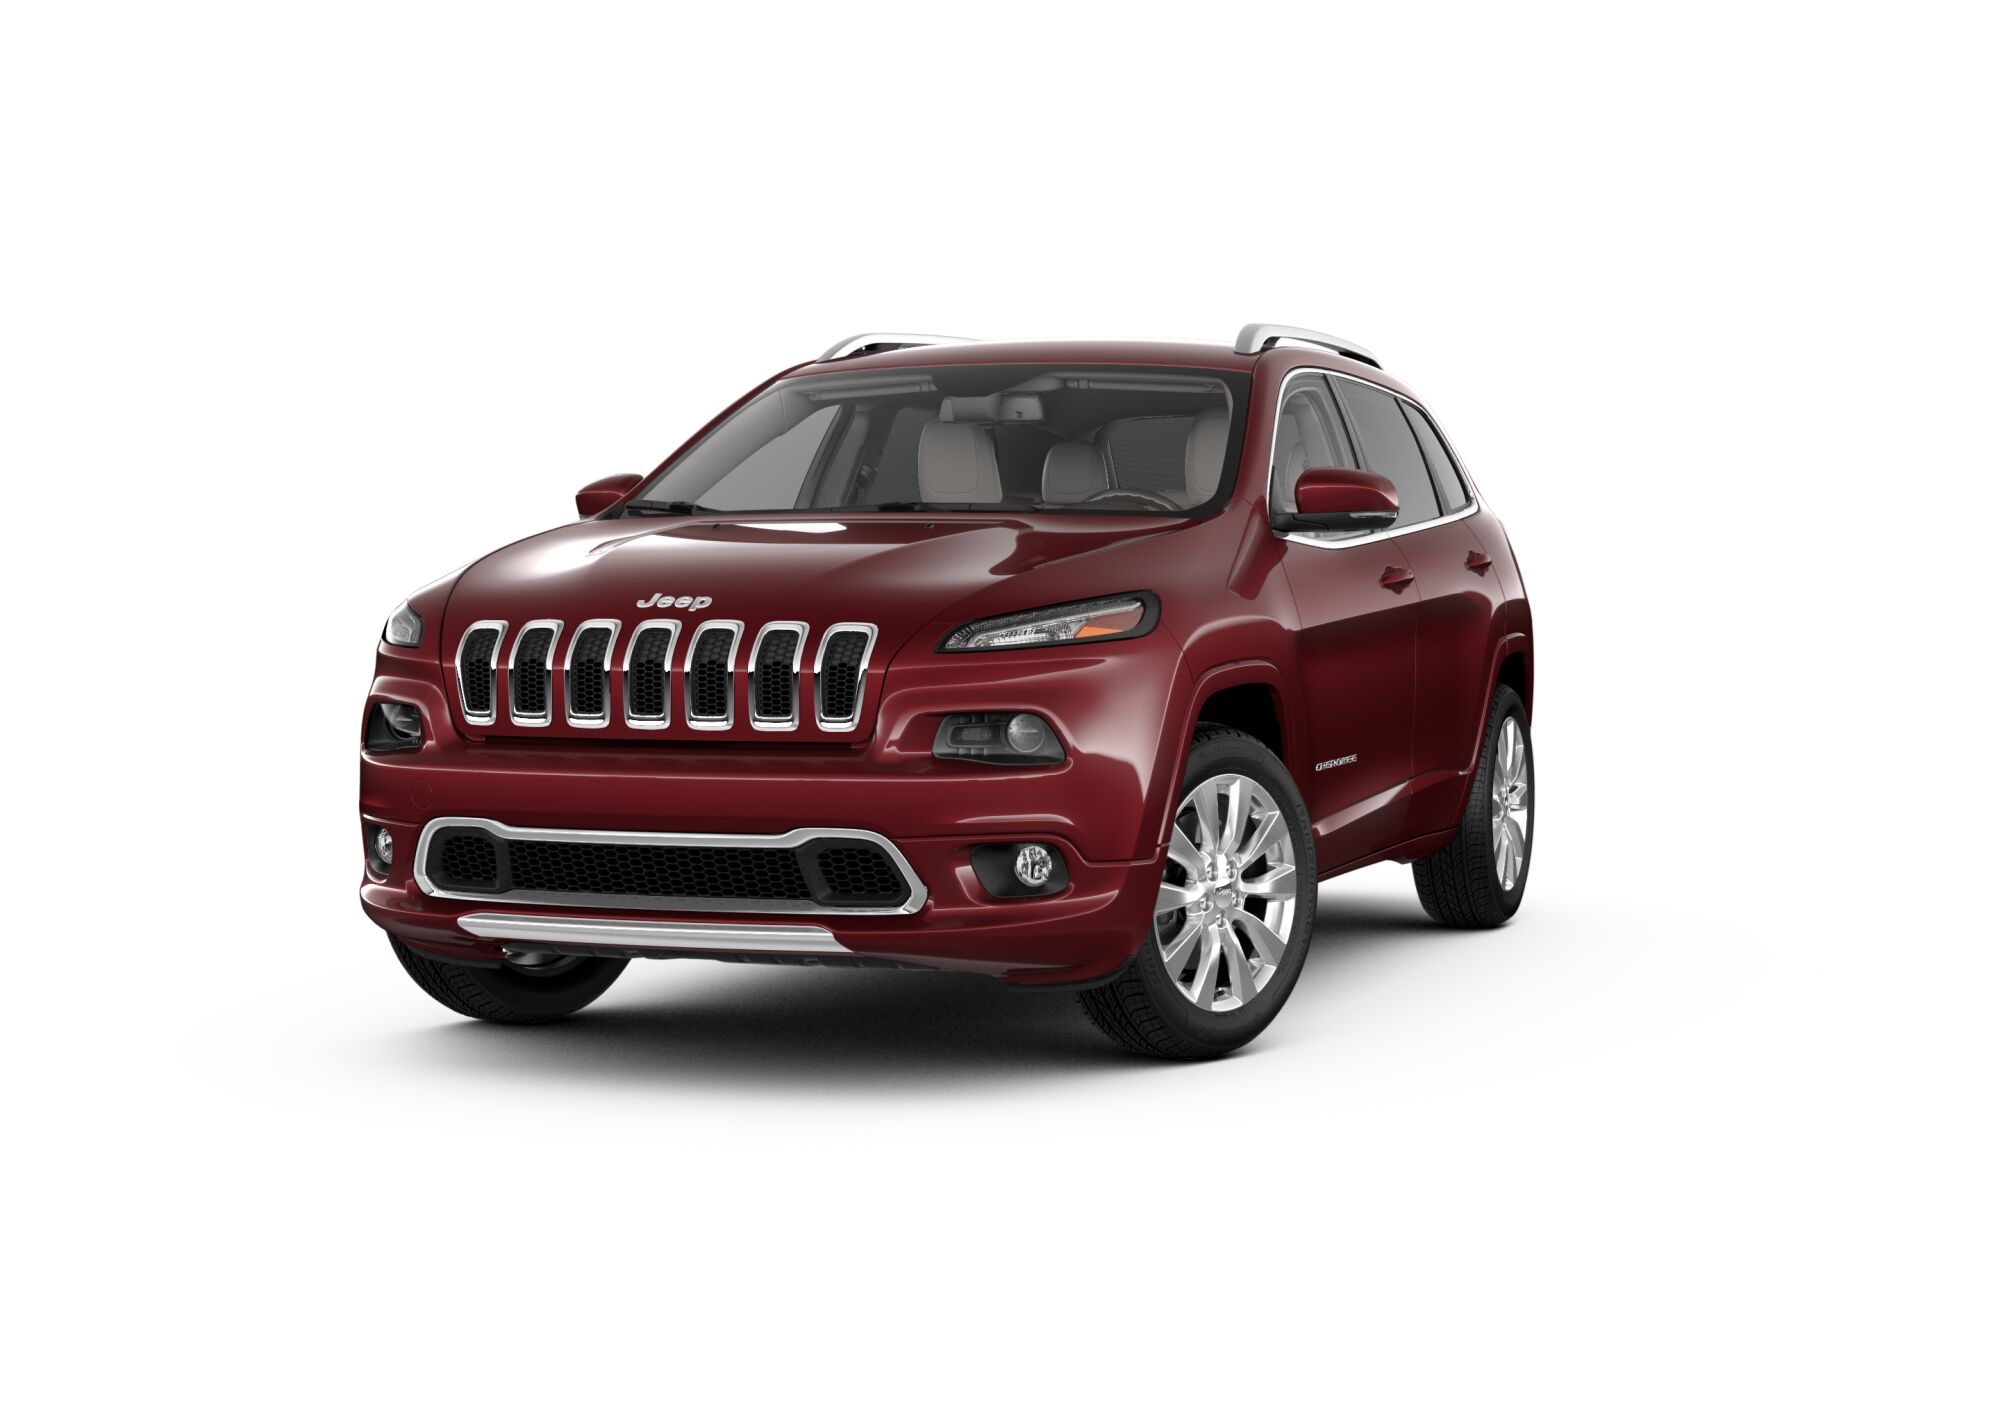 2016 Jeep Cherokee Sport Full Specs, Features and Price | CarBuzz